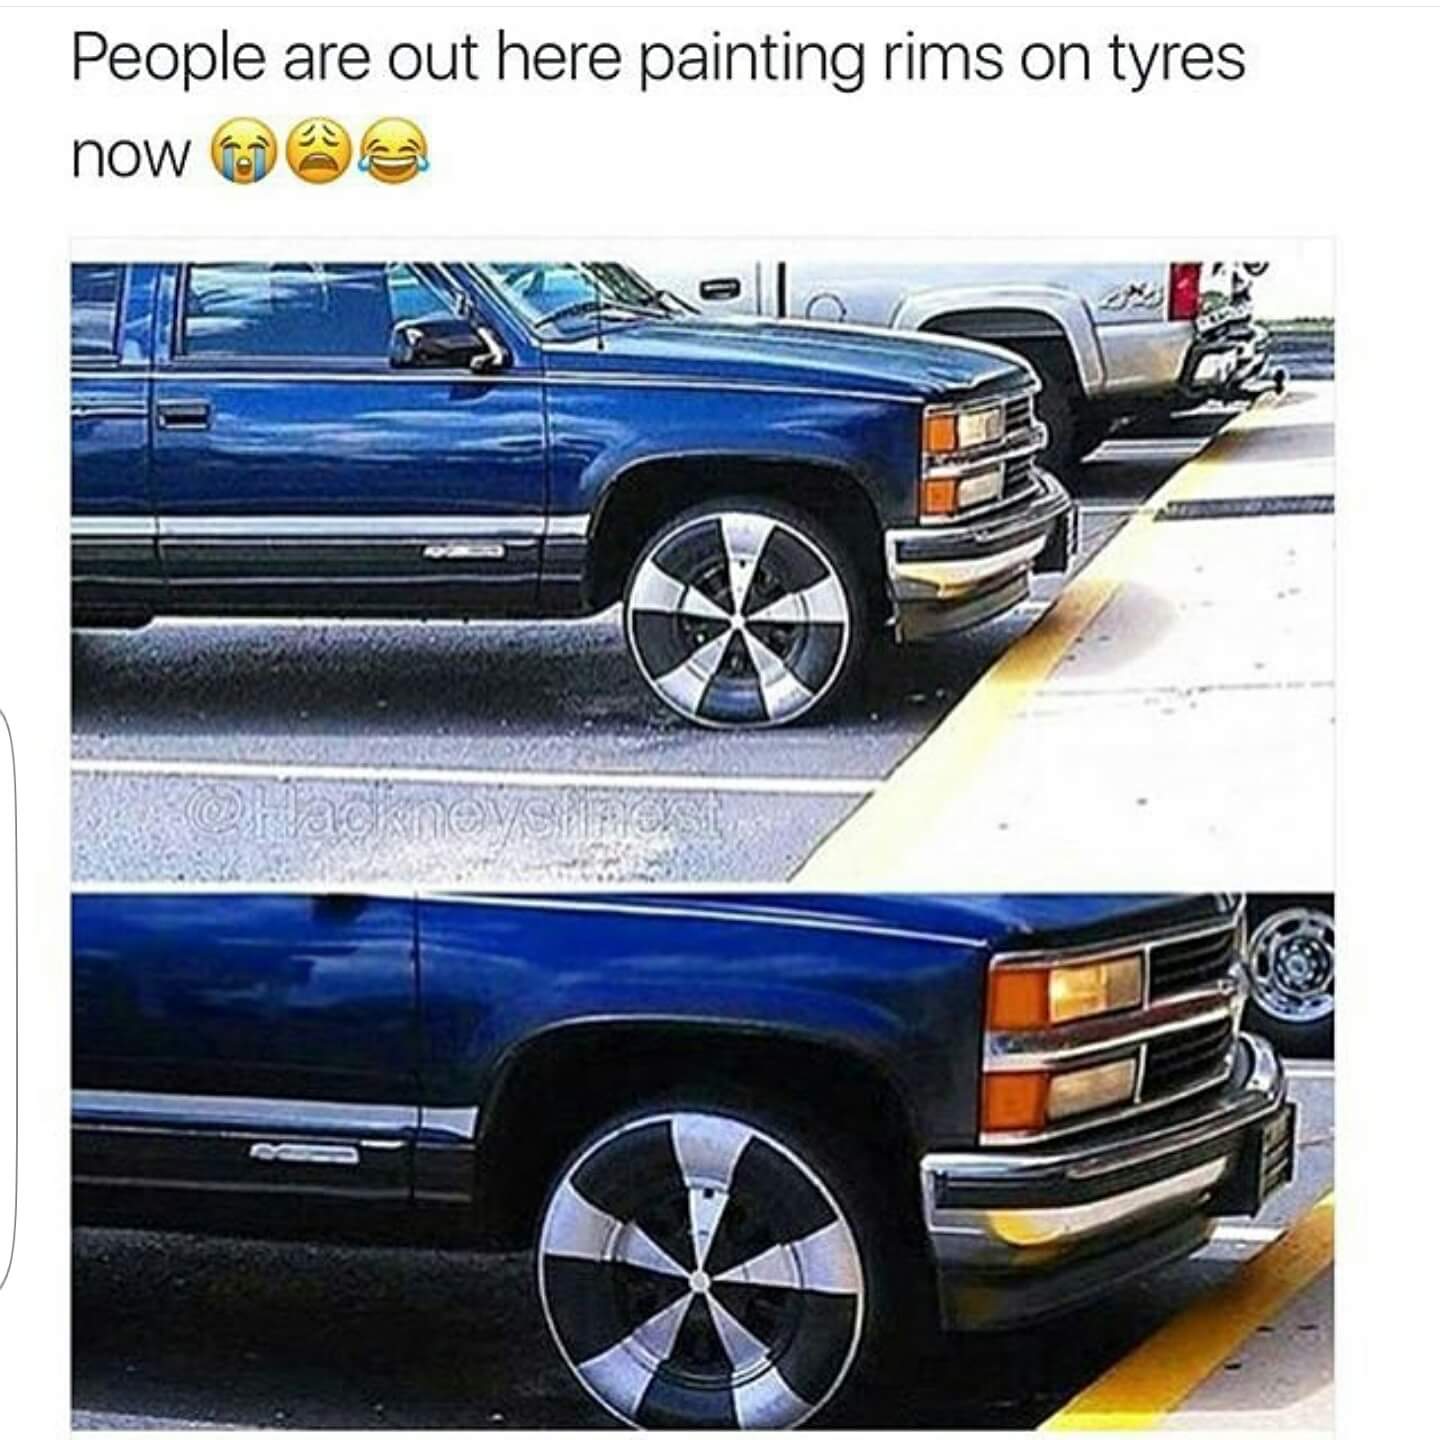 painted rims on tires - People are out here painting rims on tyres now a